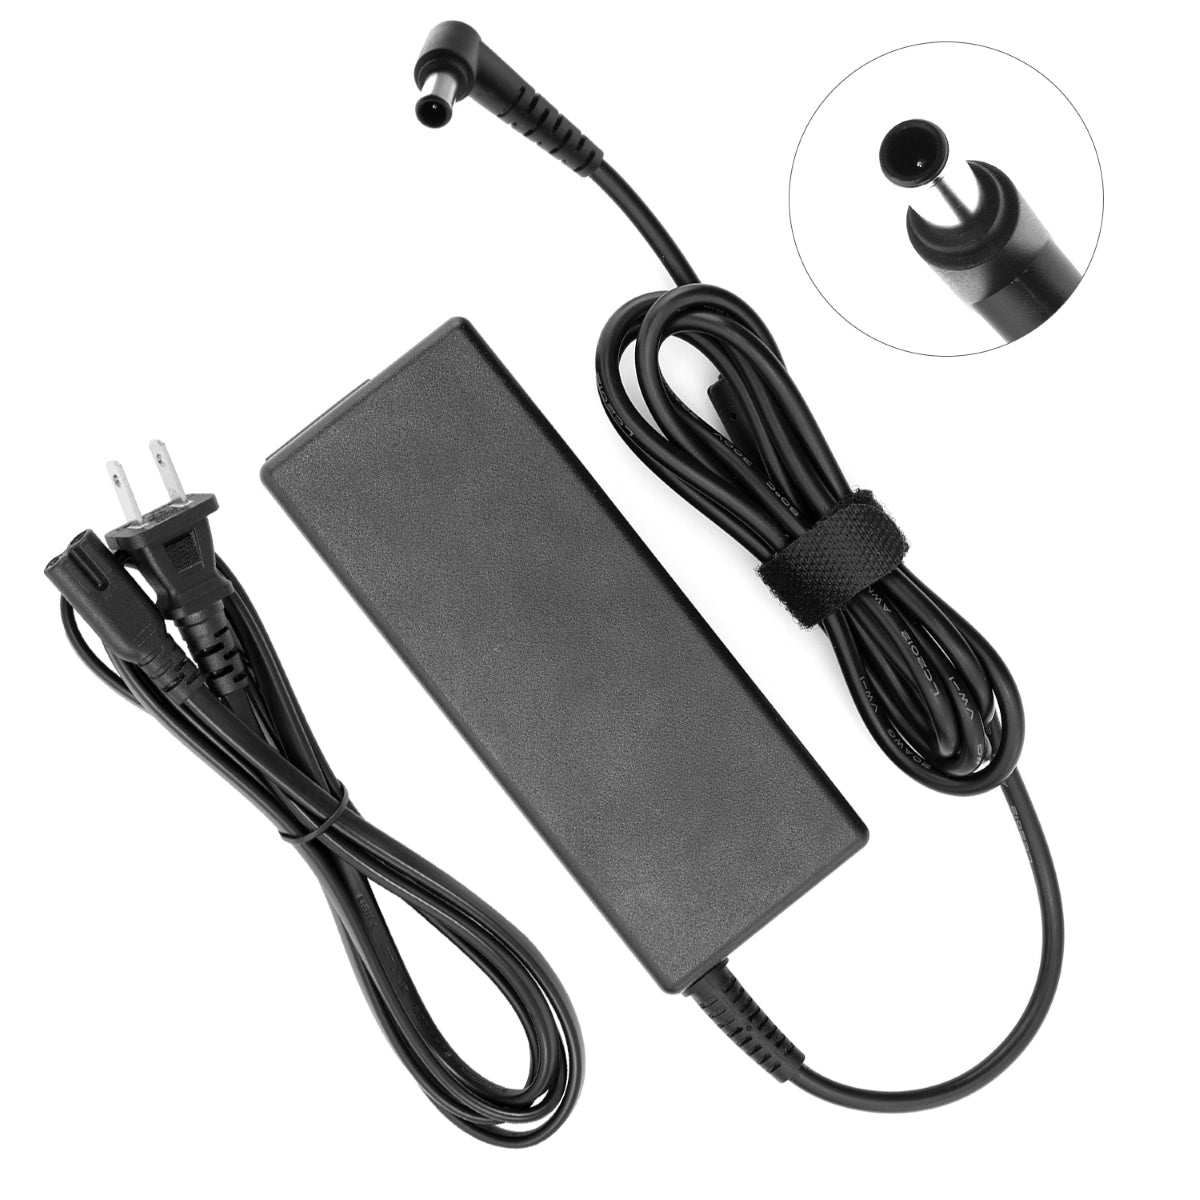 AC Adapter Power Supply for Samsung S32F351FUU TV Monitor